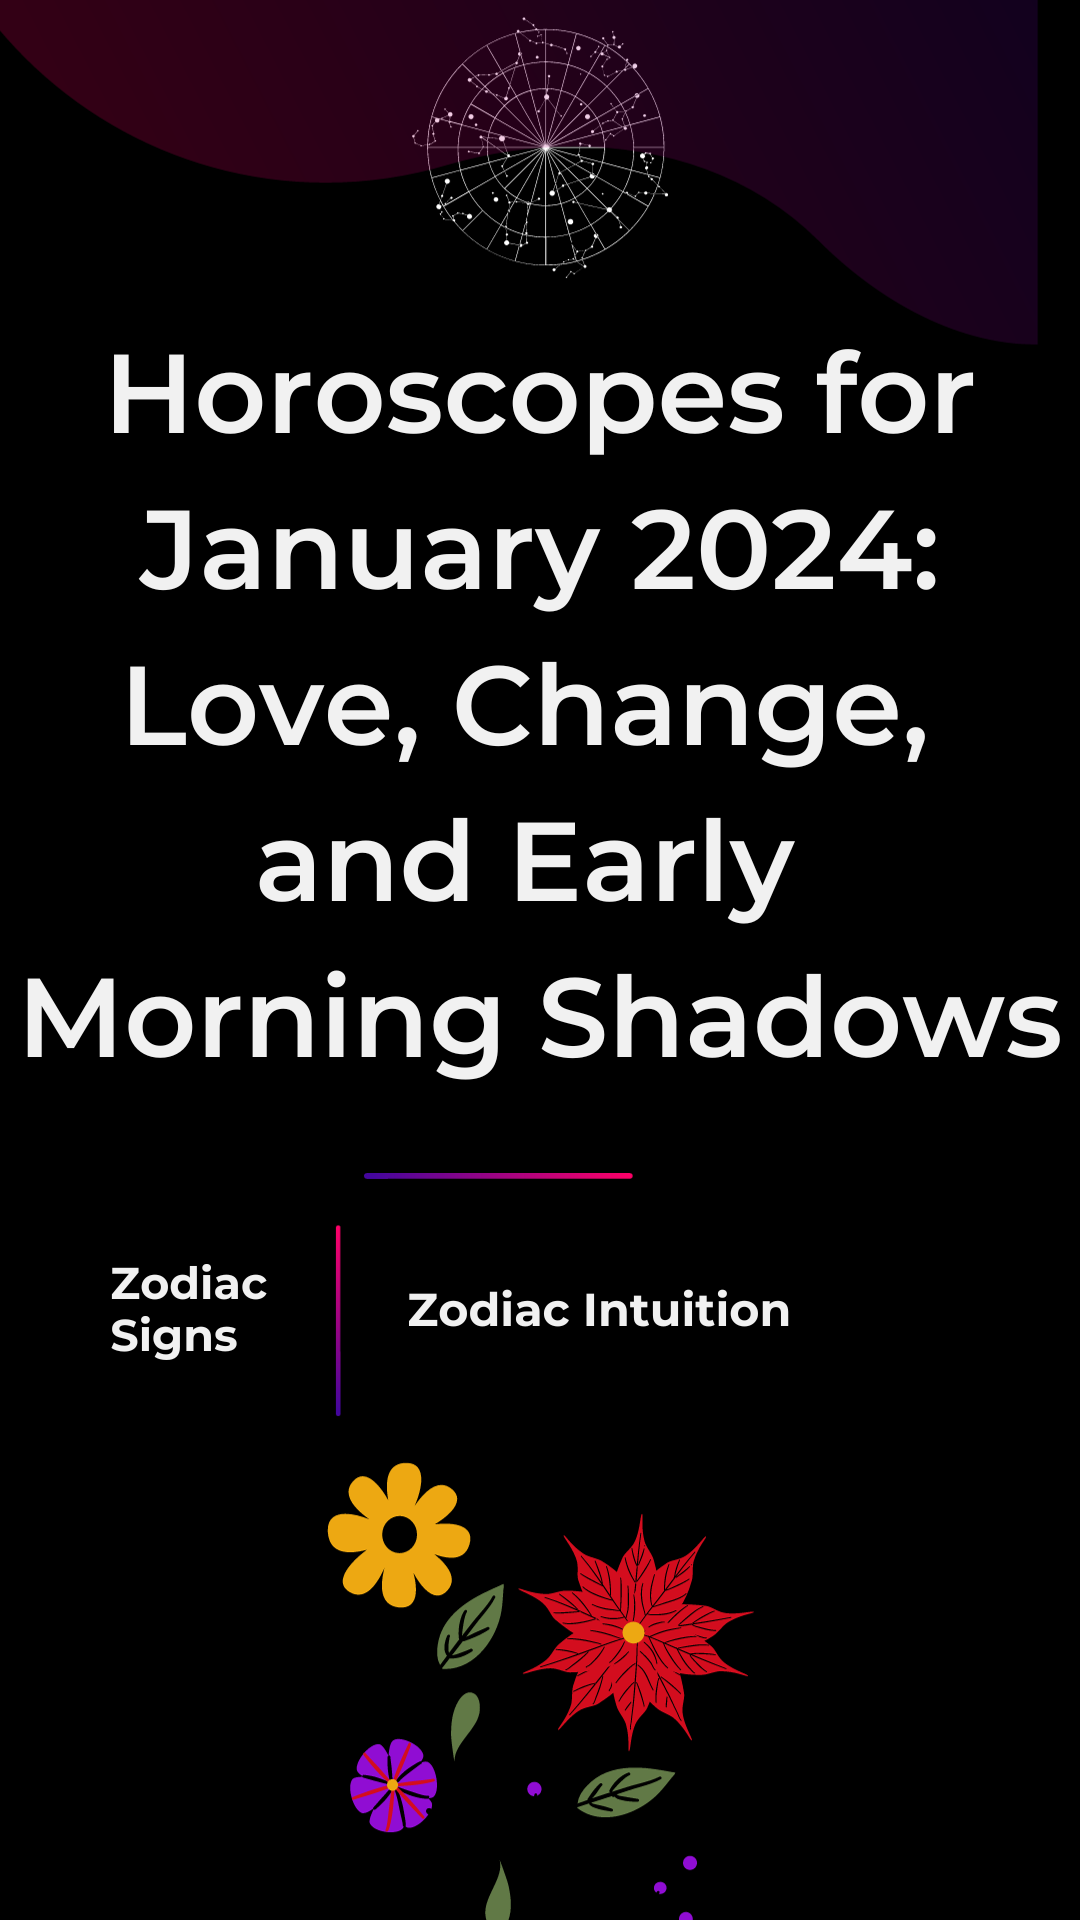 Horoscopes for January 2024: Love, Change, and Early Morning Shadows